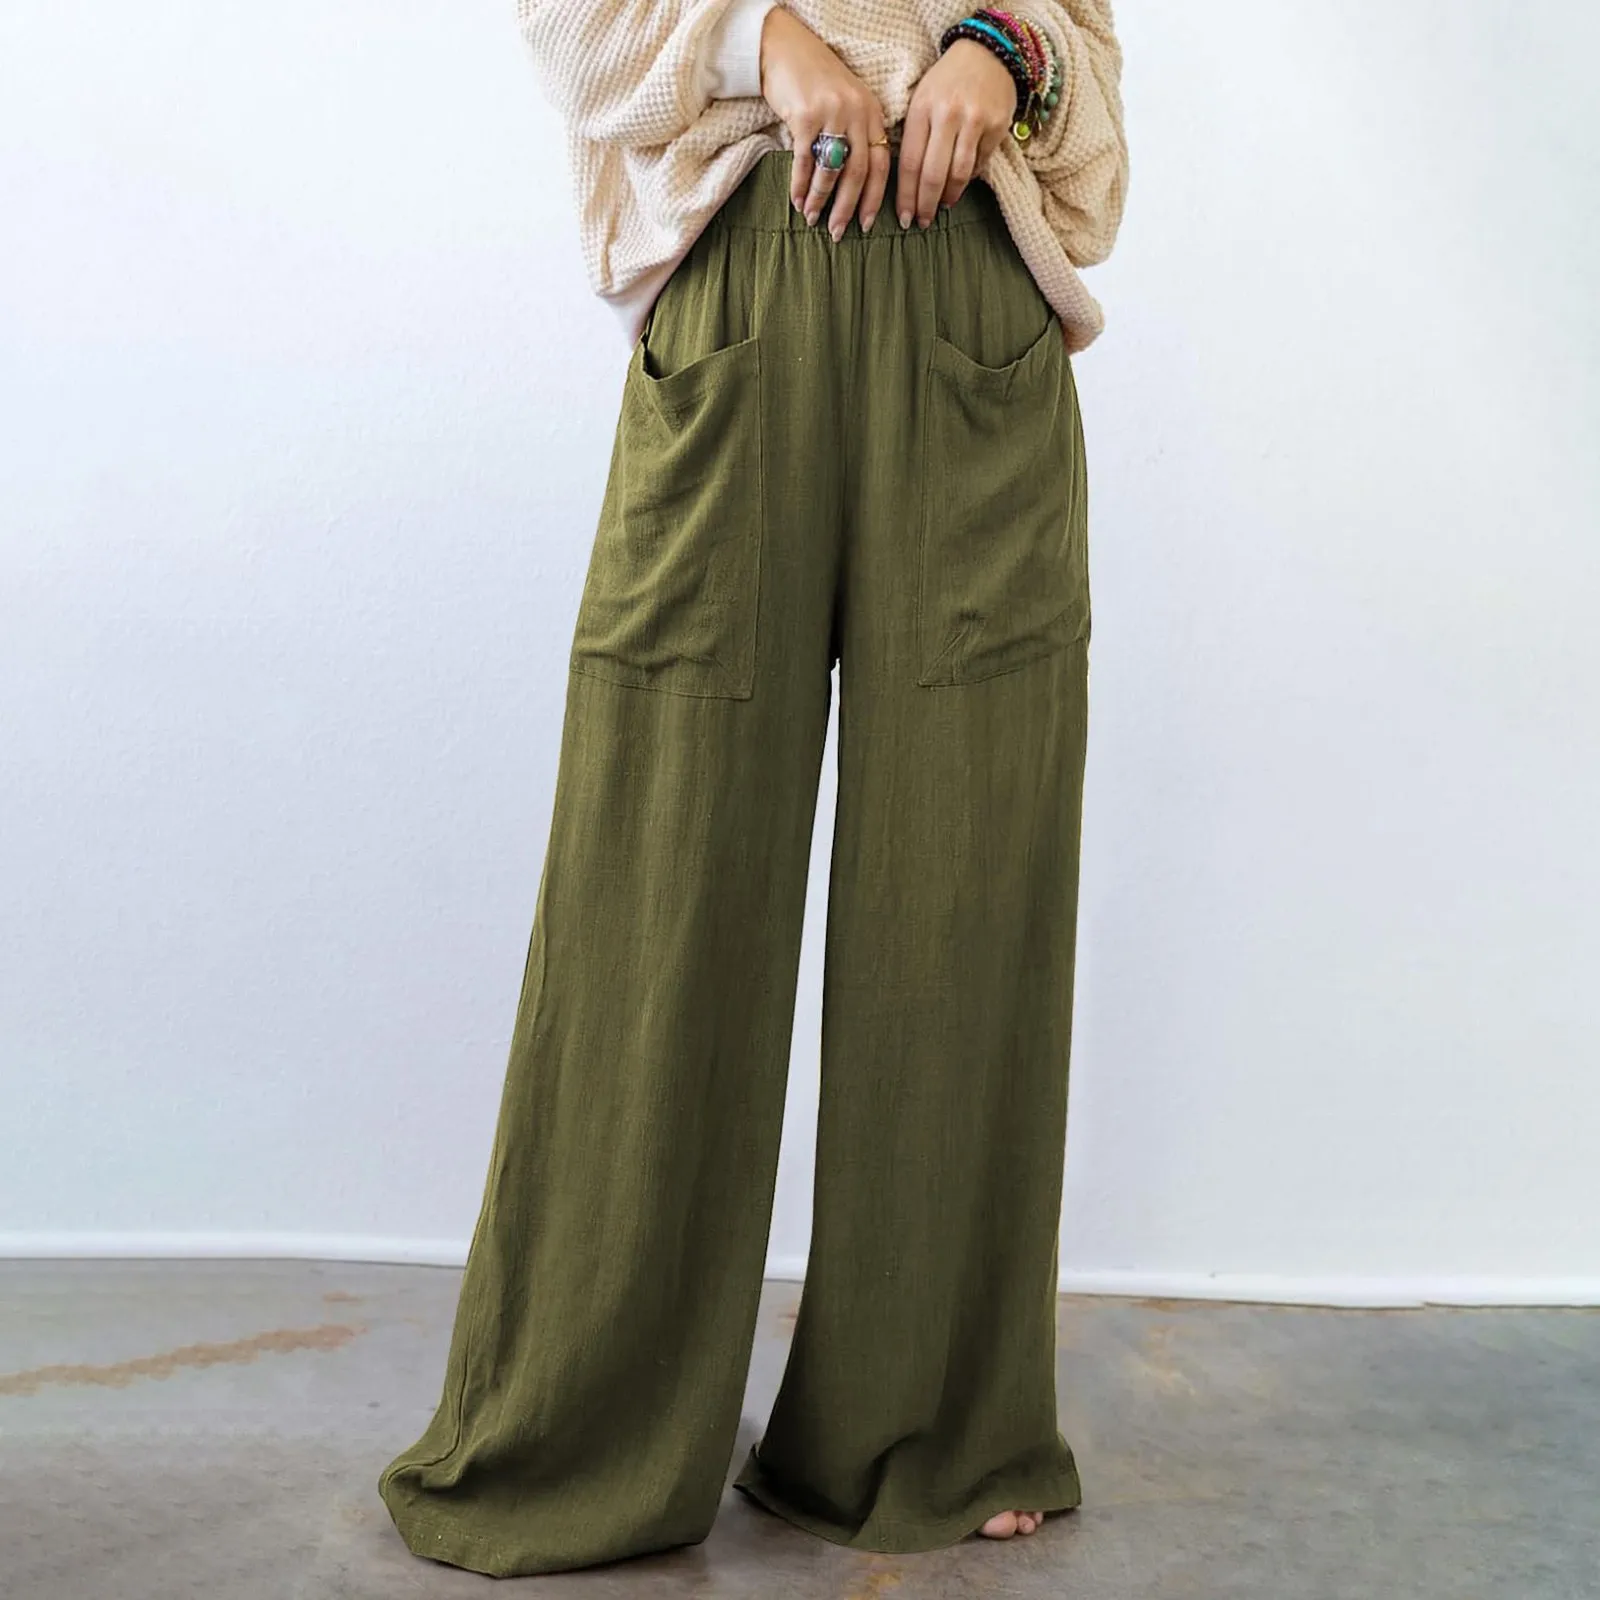 

Wide Leg Pants for Women Elastic Waist Drawstring Solid Color Linen Pants Causal Loose Summer Beach Pants With Pockets